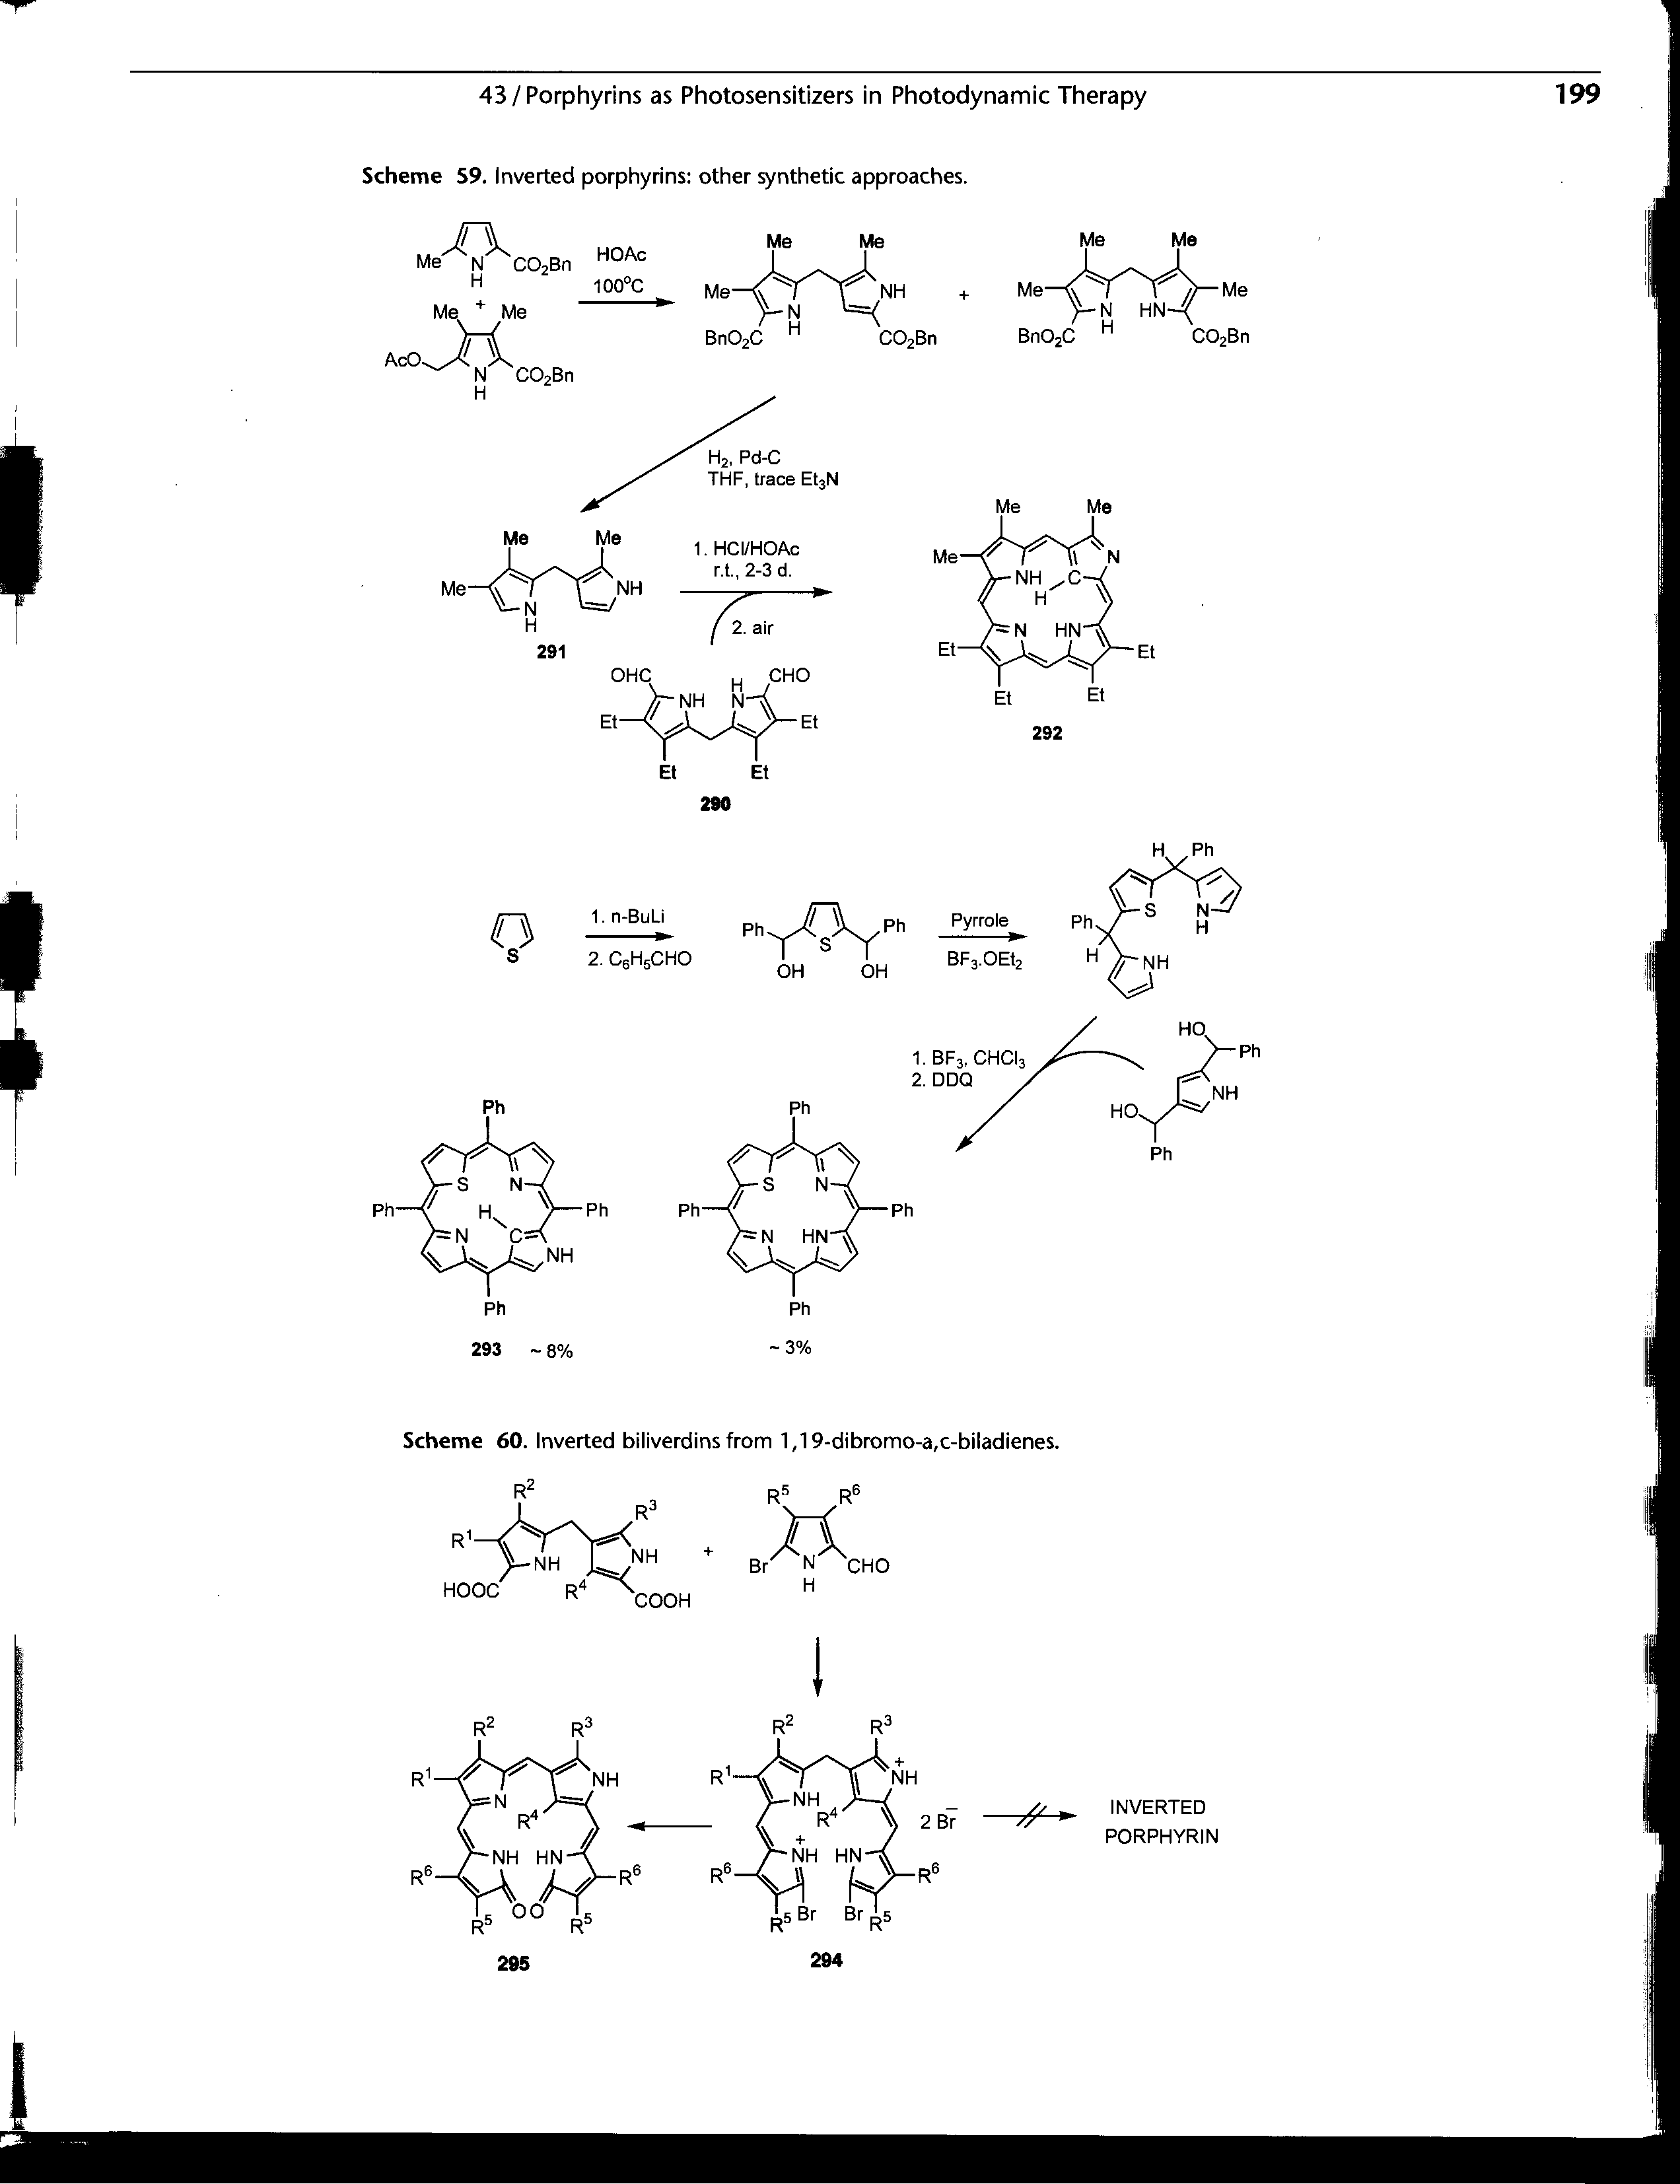 Scheme 59. Inverted porphyrins other synthetic approaches.